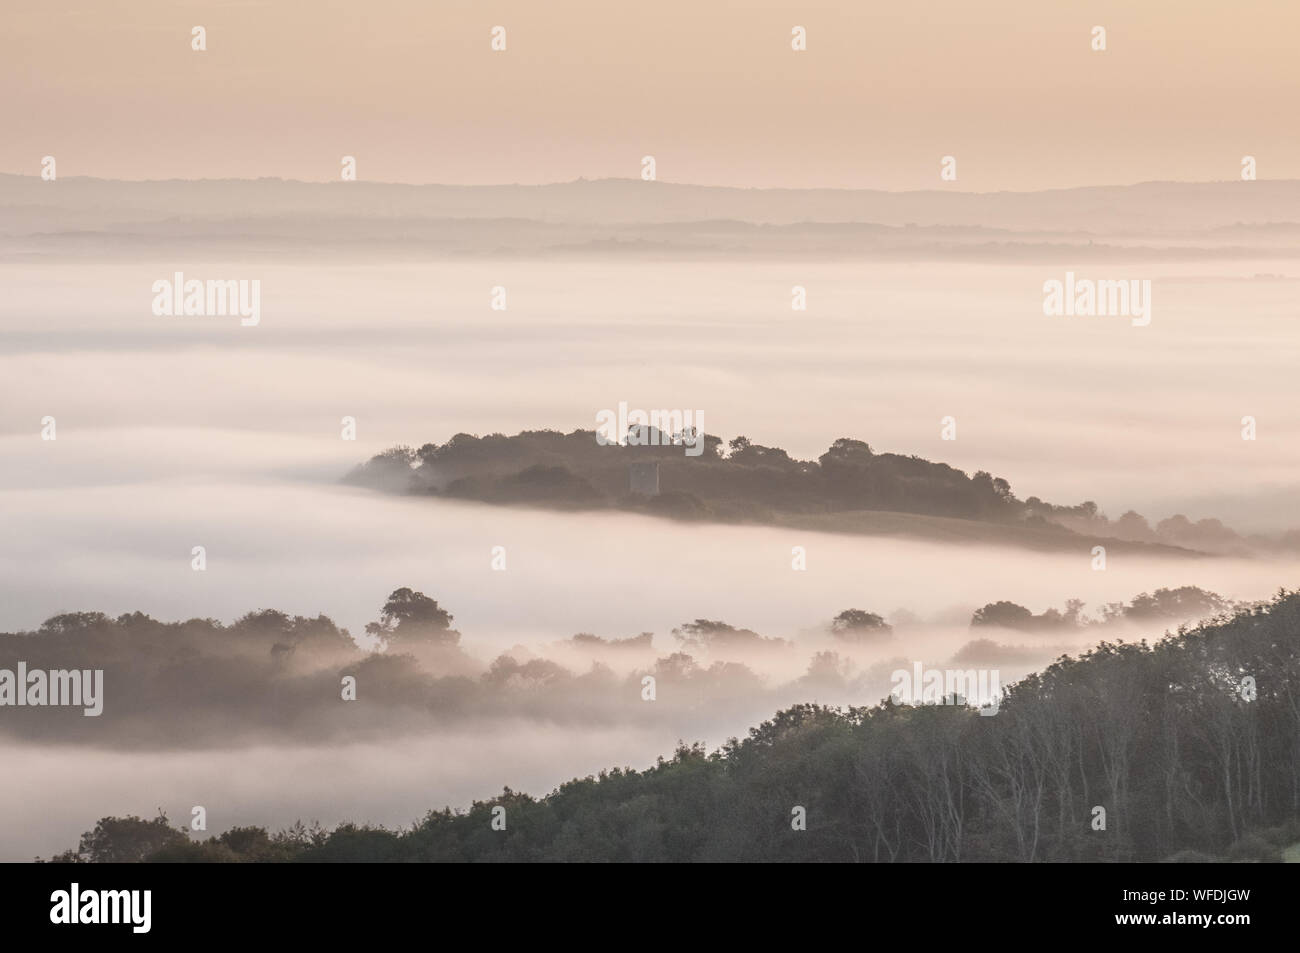 Firle, Lewes, East Sussex, UK..31st August 2019..Tranquil ethereal scene as early morning mist envelopes the countryside. . Stock Photo